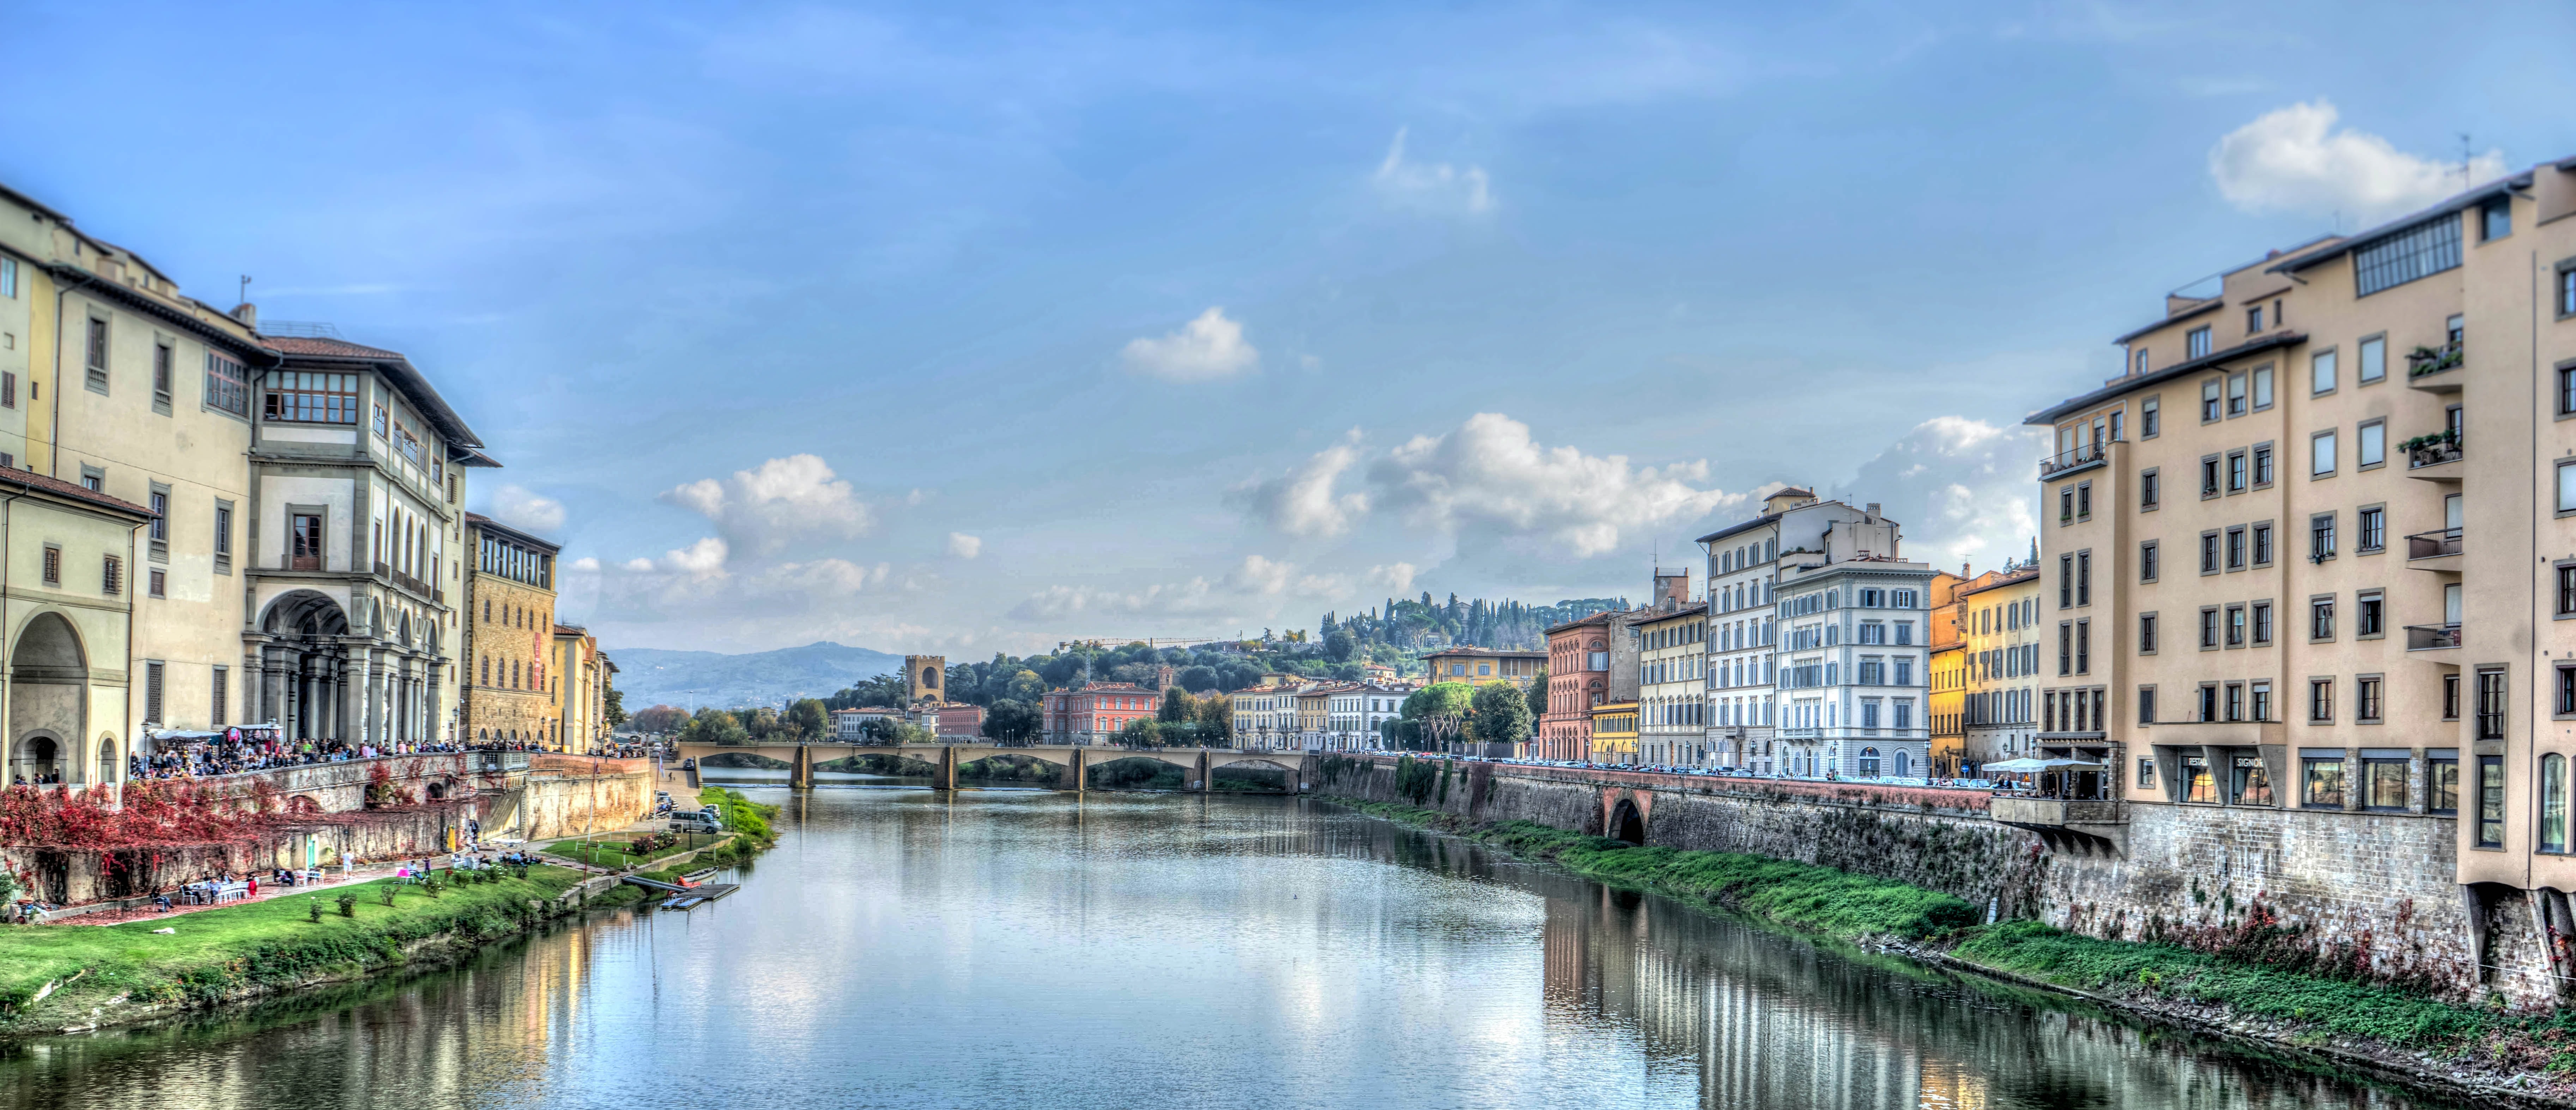 Italy, Europe, Florence, Arno River, architecture, building exterior